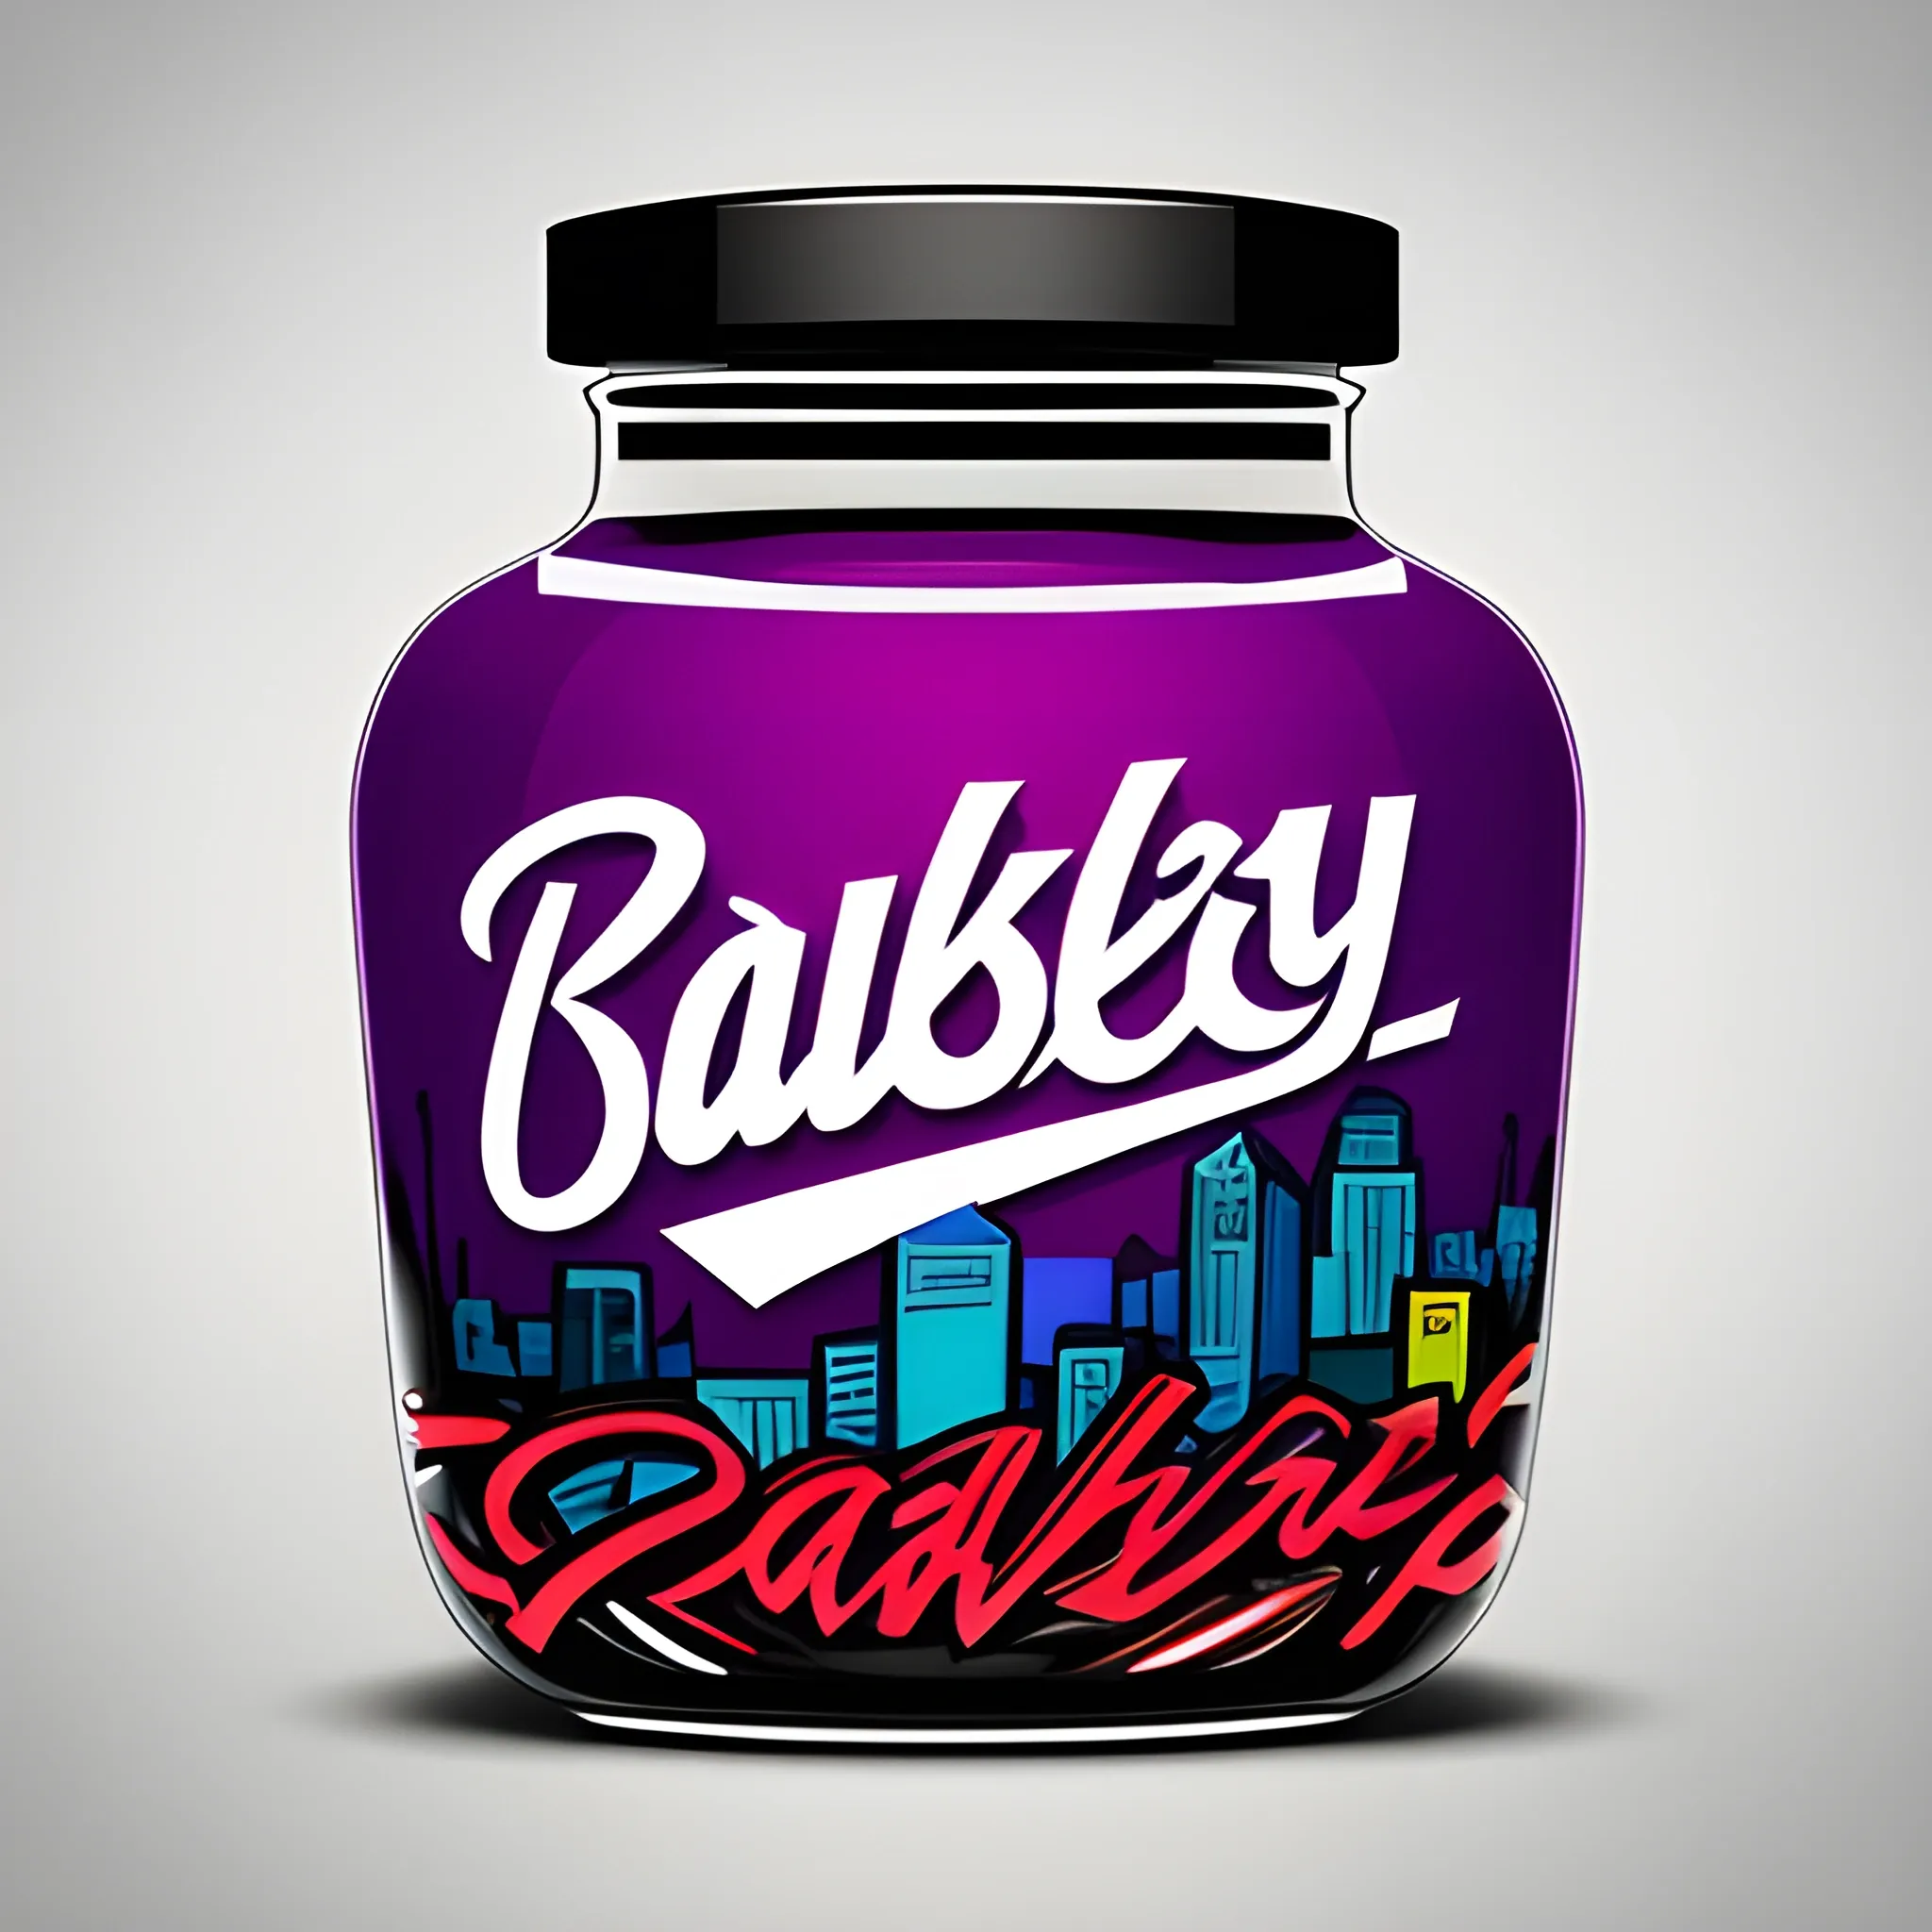 Create a vibrant and edgy label design for 'Cali Berry' Jar, targeting a youthful, urban audience. Incorporate elements that reflect a dynamic cityscape, graffiti-inspired artwork, and a sense of nightlife energy. Utilize bold, modern fonts and vivid color schemes to evoke a sense of excitement and style. Emphasize the rebellious and adventurous spirit of the brand, while maintaining a clean and eye-catching layout. Remember to incorporate the 'GEMZ' logo prominently. Get creative with the composition to make it stand out on the shelf and appeal to the young, trendsetting demographic